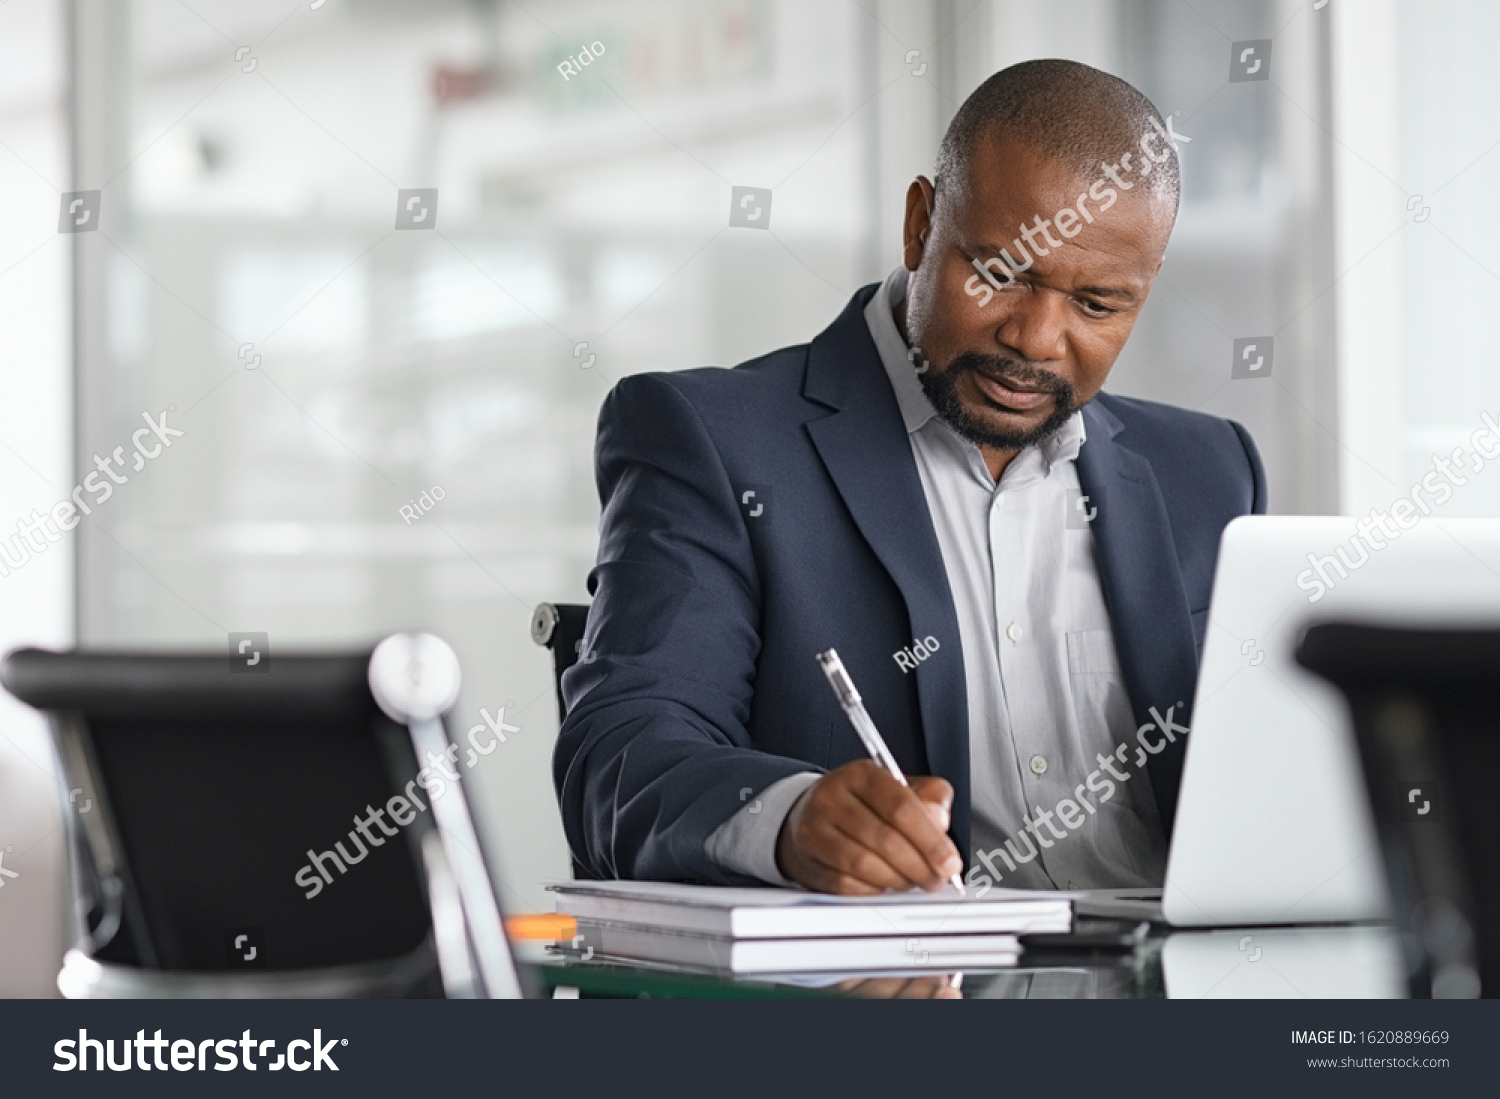 African serious businessman writing notes and using laptop. Mature business man writing his strategy in modern office. Focused black entrepreneur sitting at desk in modern office while working. #1620889669